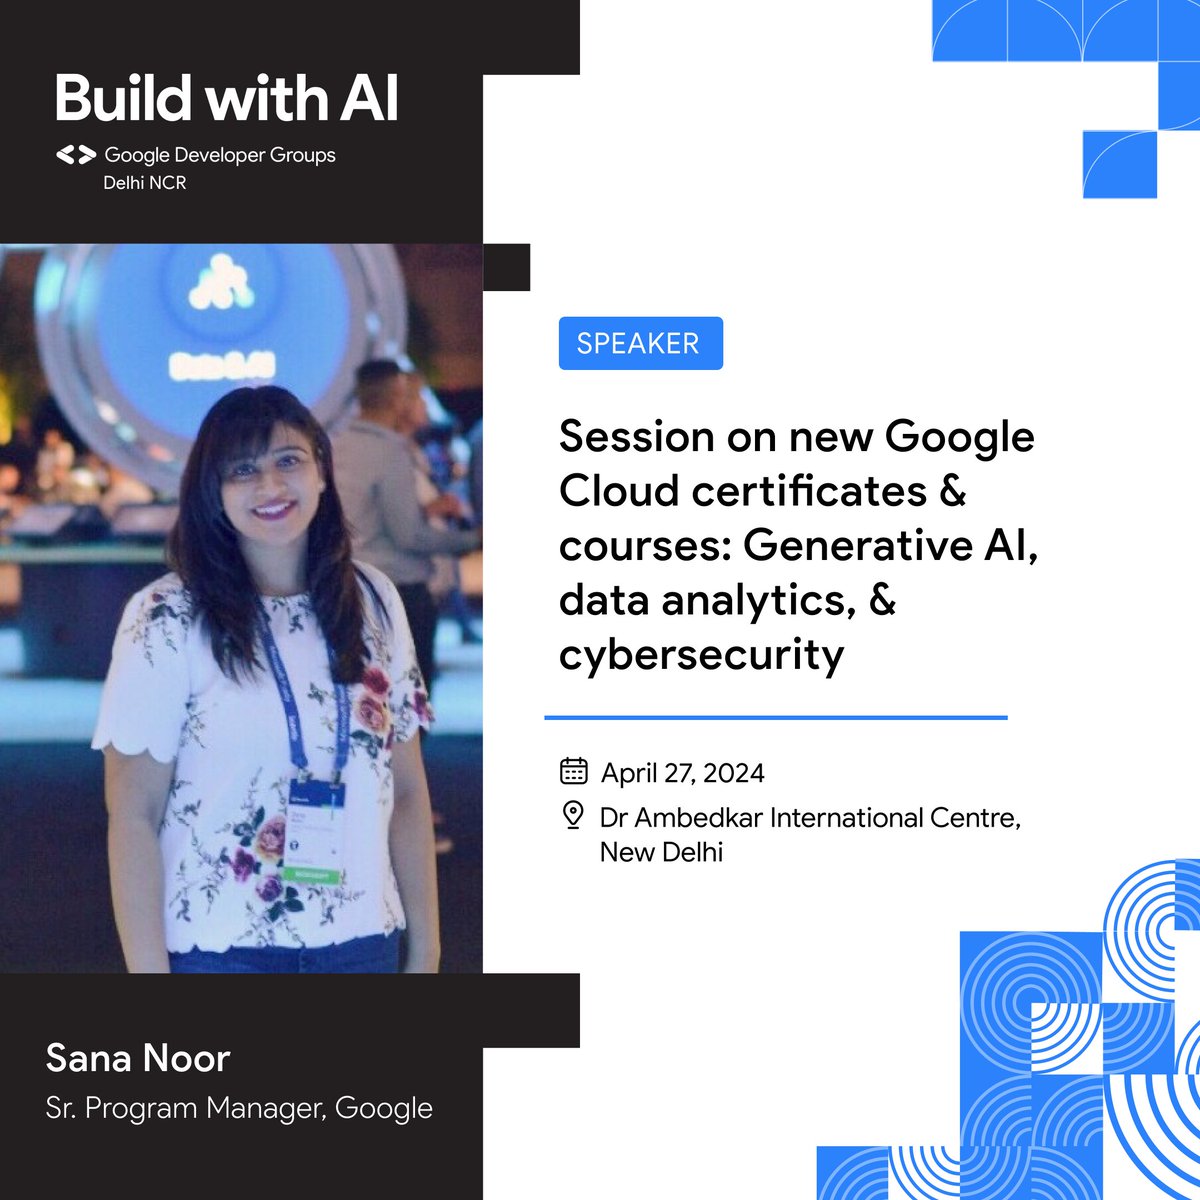 Cloud clan, get certified! 🌩️ Sana's breaking down new Google Cloud certs in Generative AI, Data, & Cybersecurity. Future-proof that career!